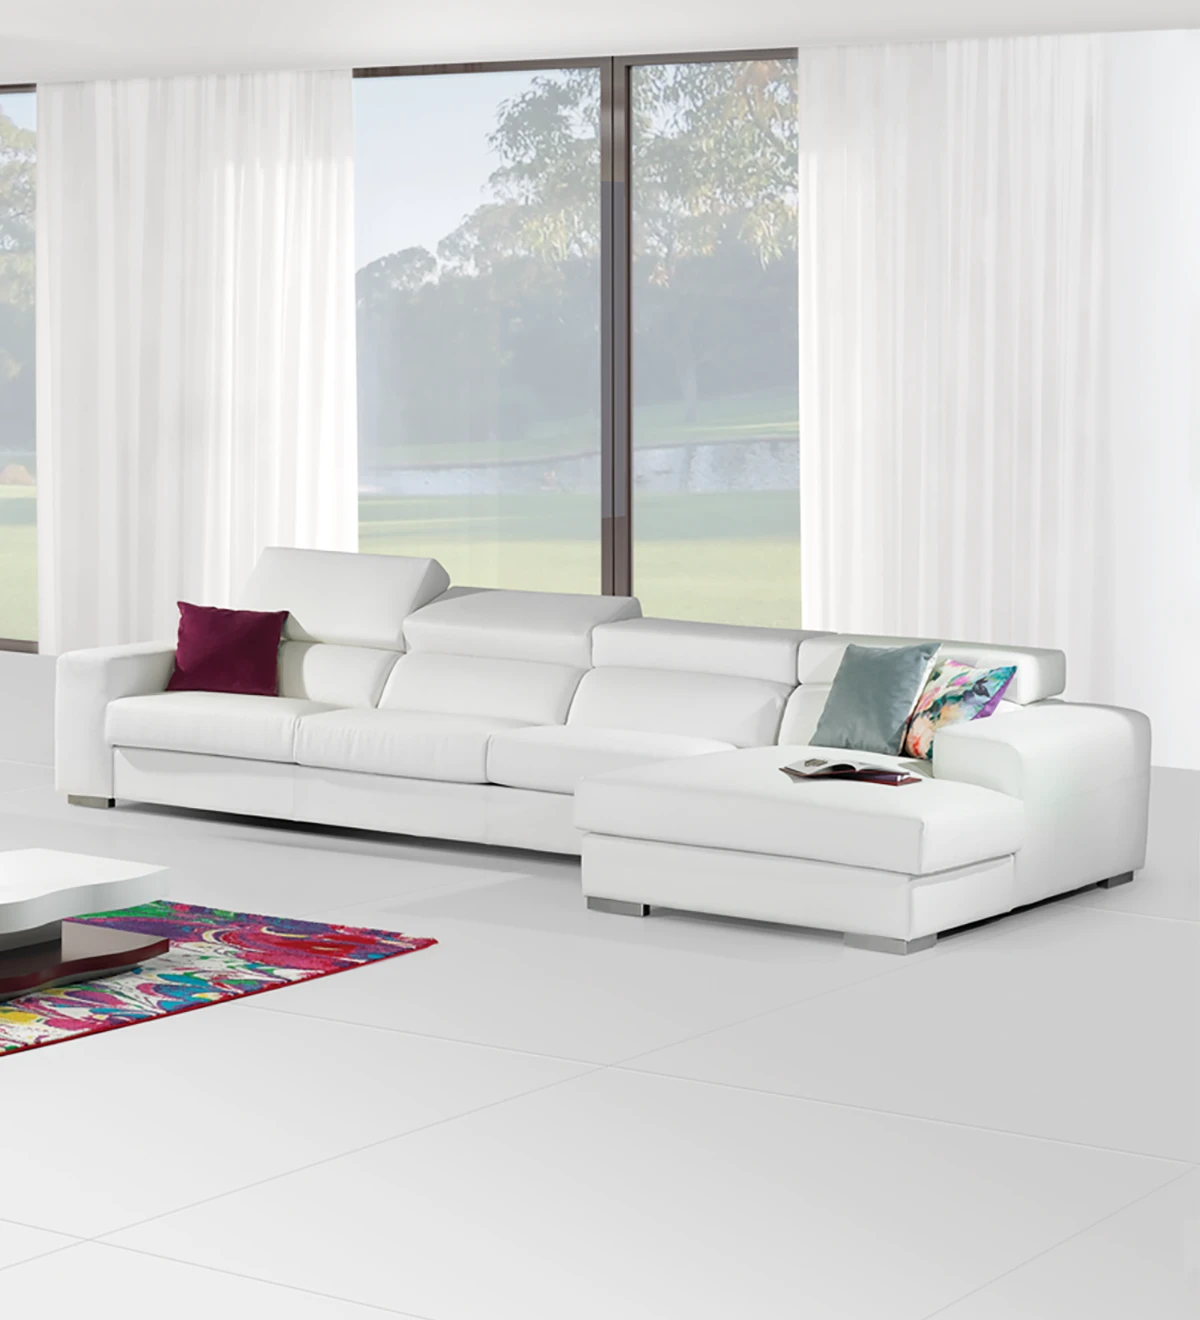 3 seater sofa with chaise longue, upholstered in white eco-leather, with reclining headrests.